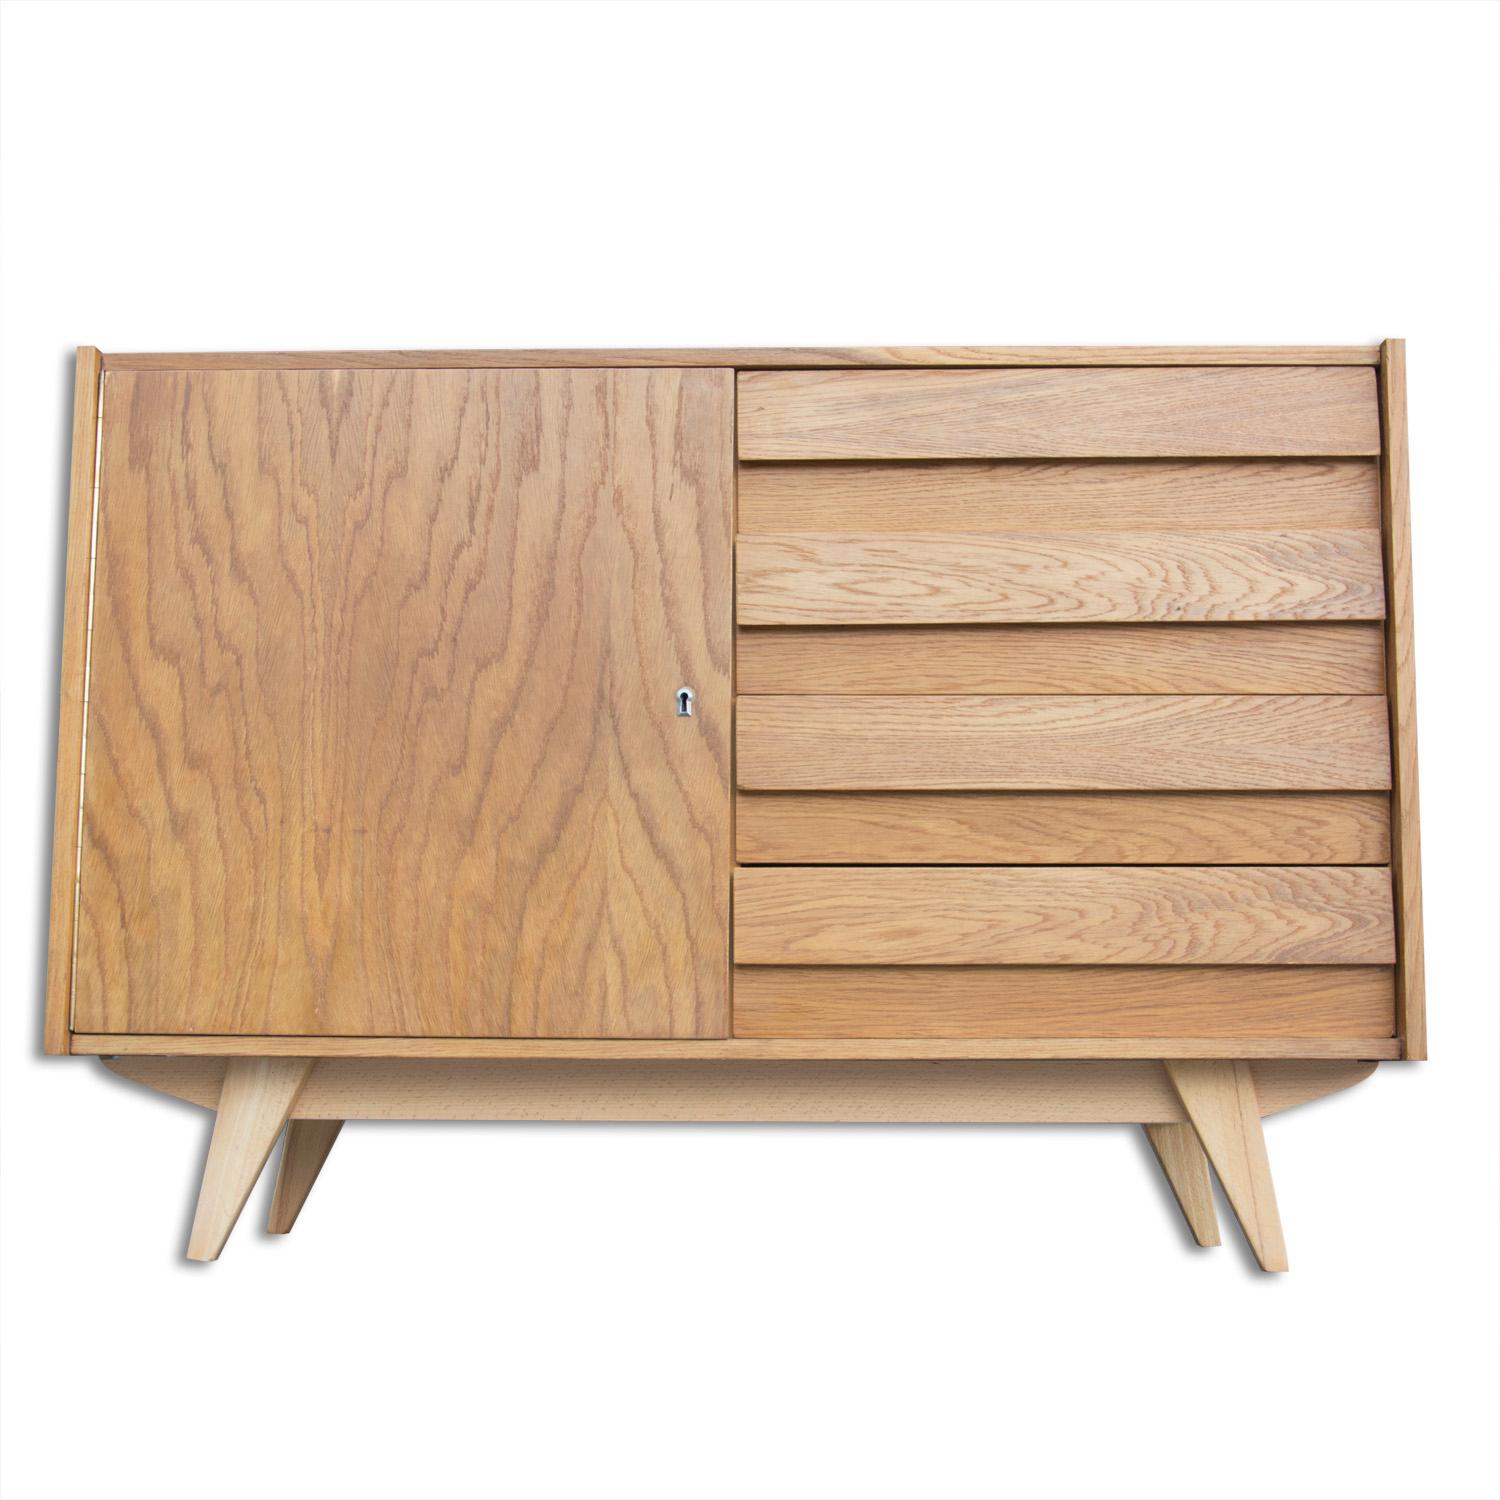 This beech and plywood sideboard, model U-458, was designed by Jirí Jiroutek and produced by Interier Praha during the 1960s. This model is associated with the world-renowned Brussels Period Expo 58 and features four drawers. The unit is in